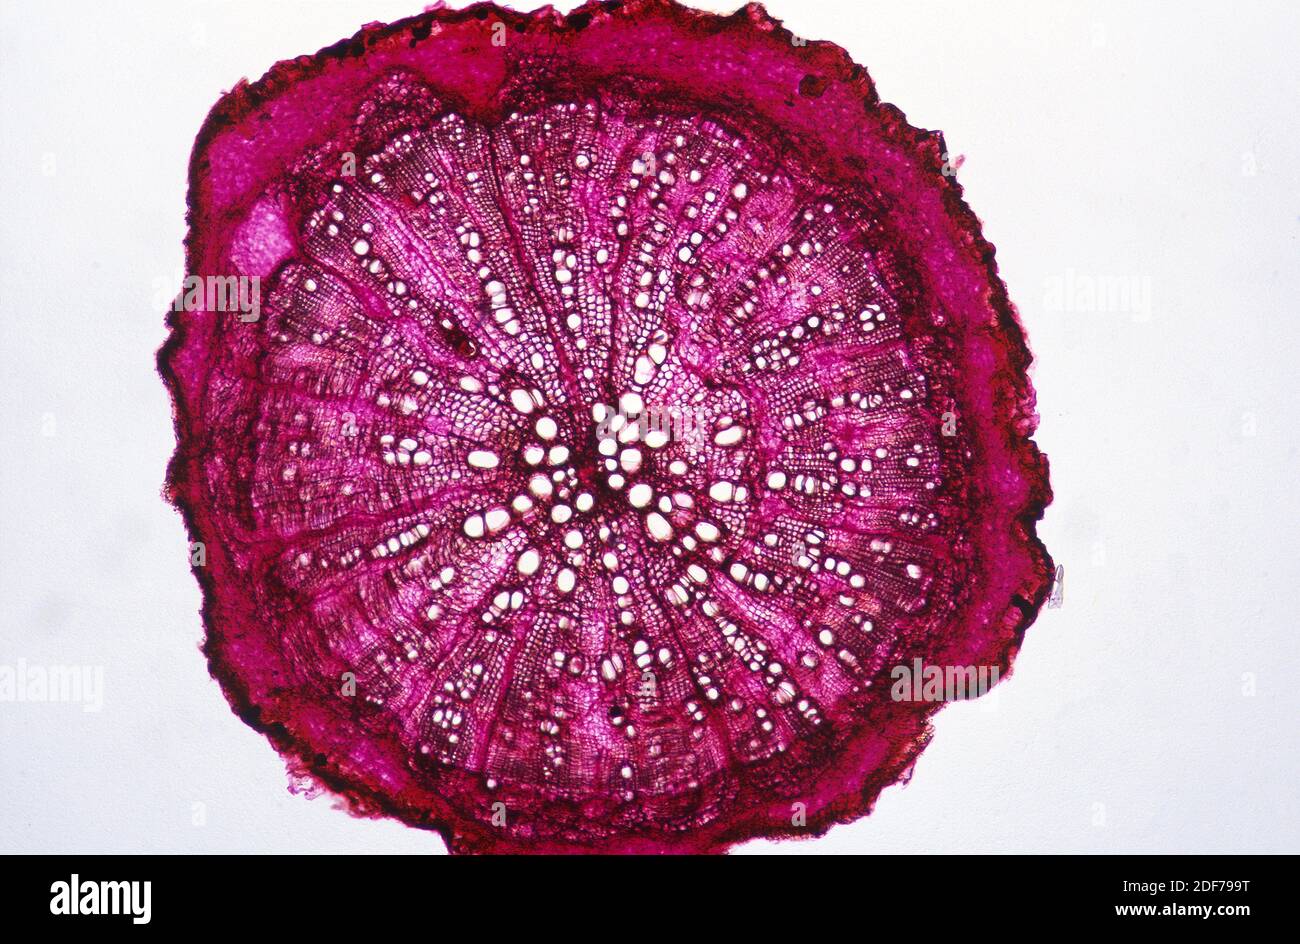 Turnip root, cross section showing cork, cambium, phloem, xylem and reserve parenchyma. Photomicrograph. Stock Photo